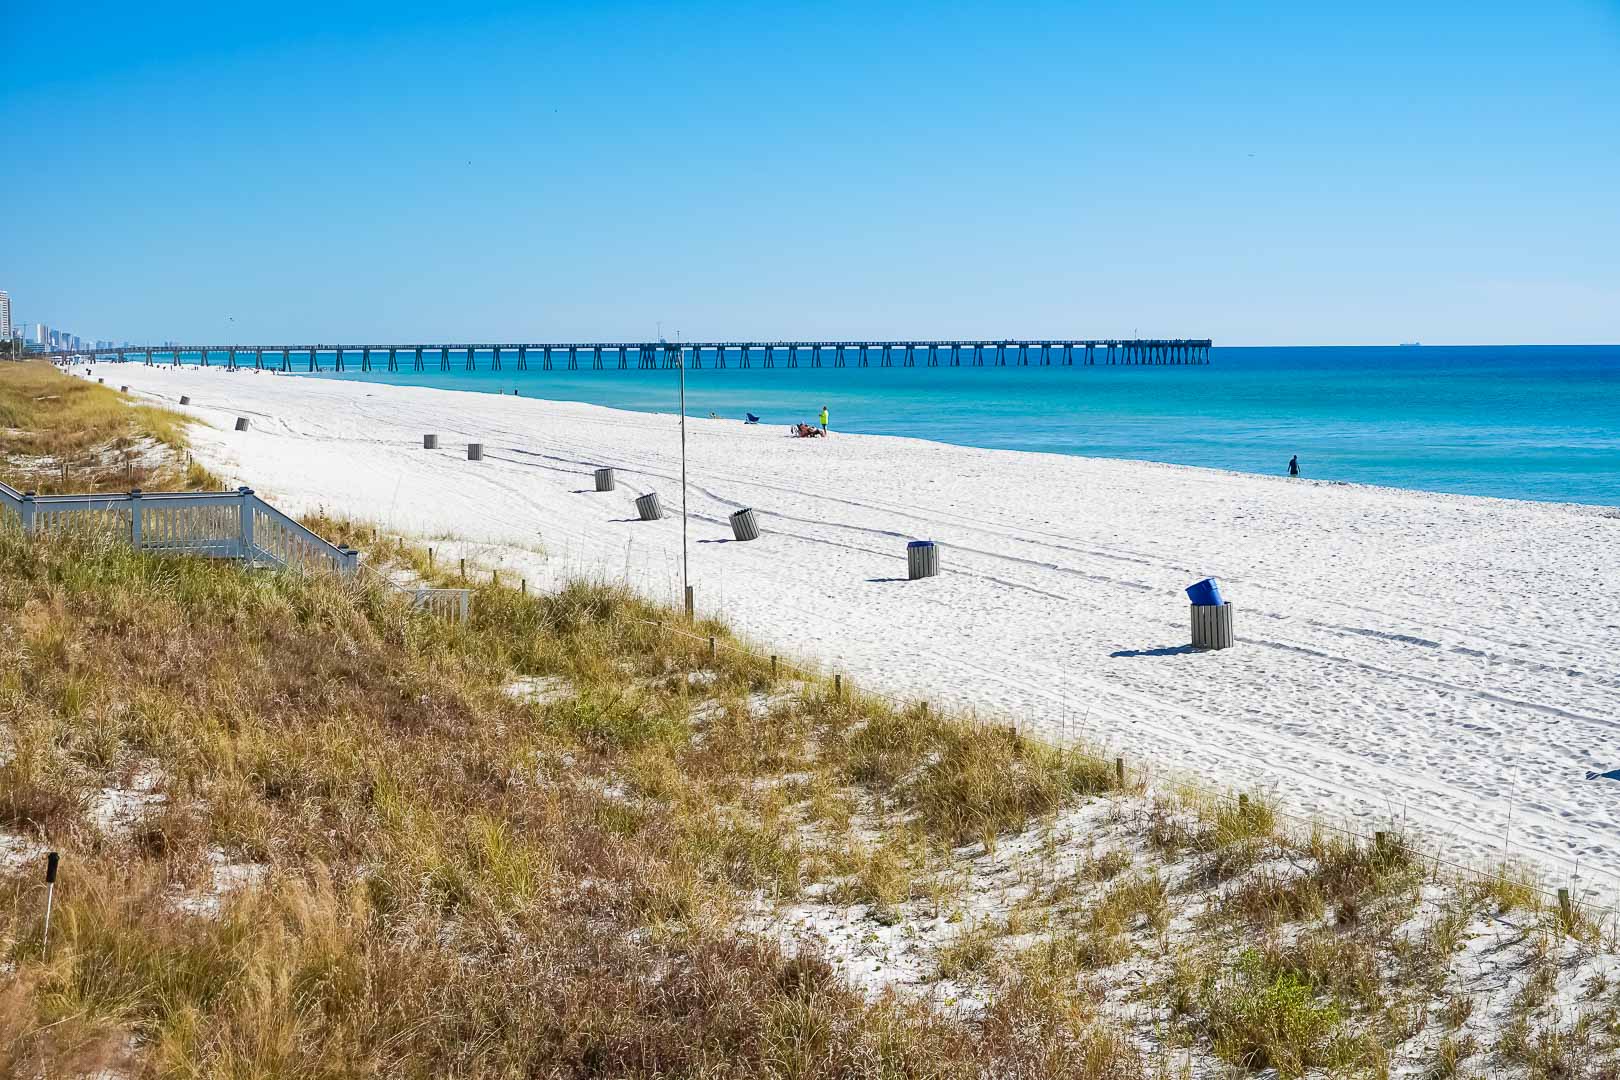 A scenic view with beach access at VRI's Panama City Resort & Club in Florida.